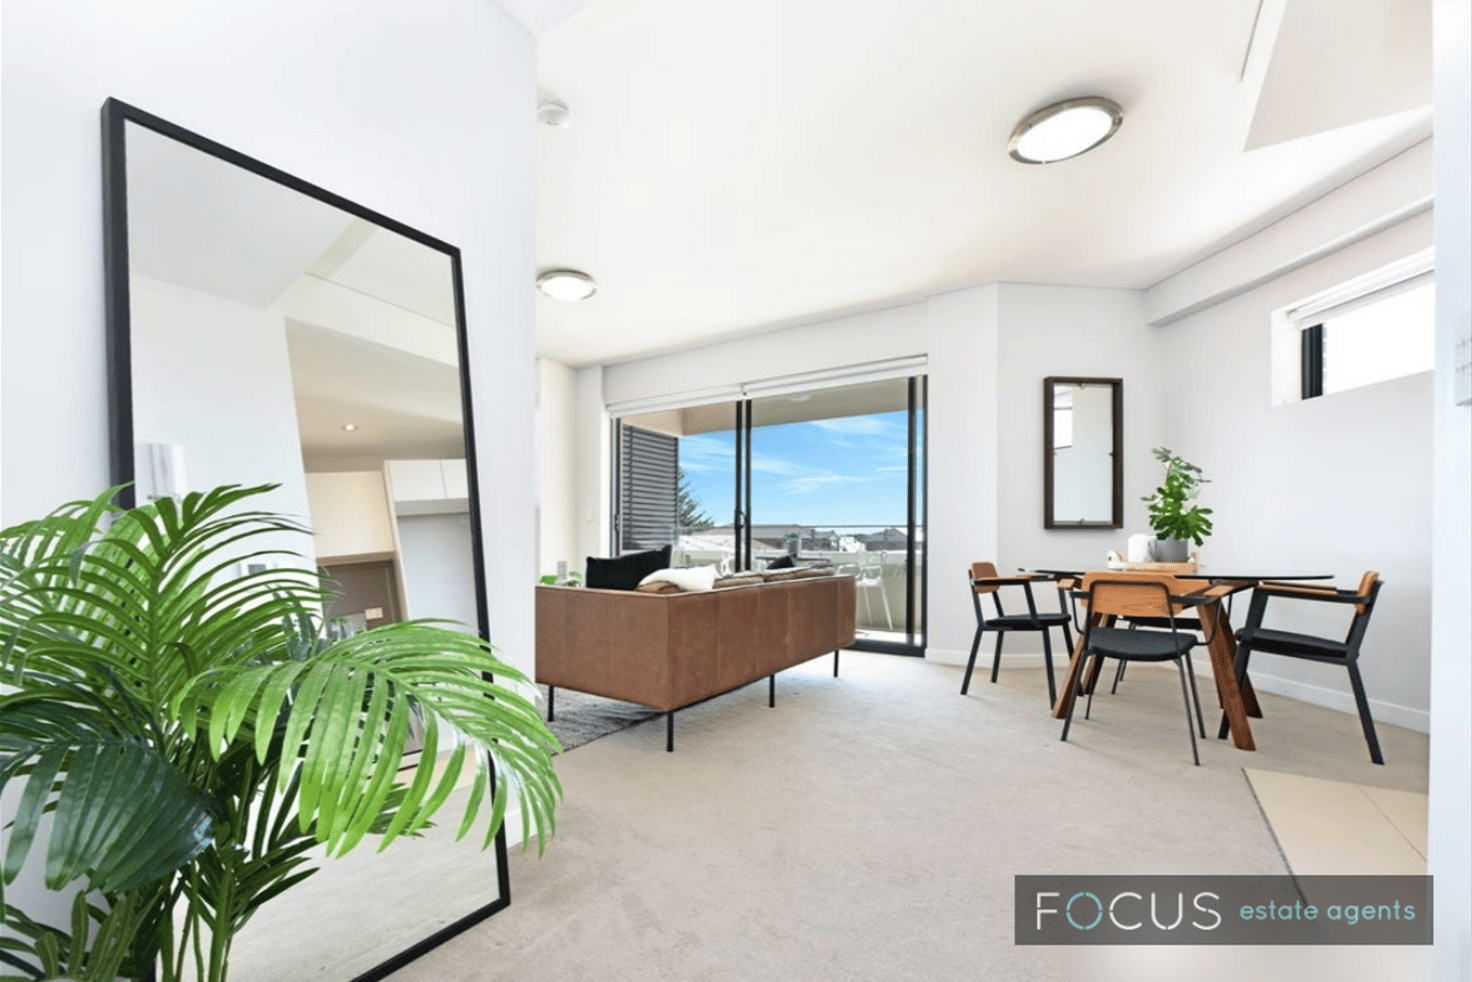 Main view of Homely apartment listing, 9/96 Maroubra Rd, Maroubra NSW 2035